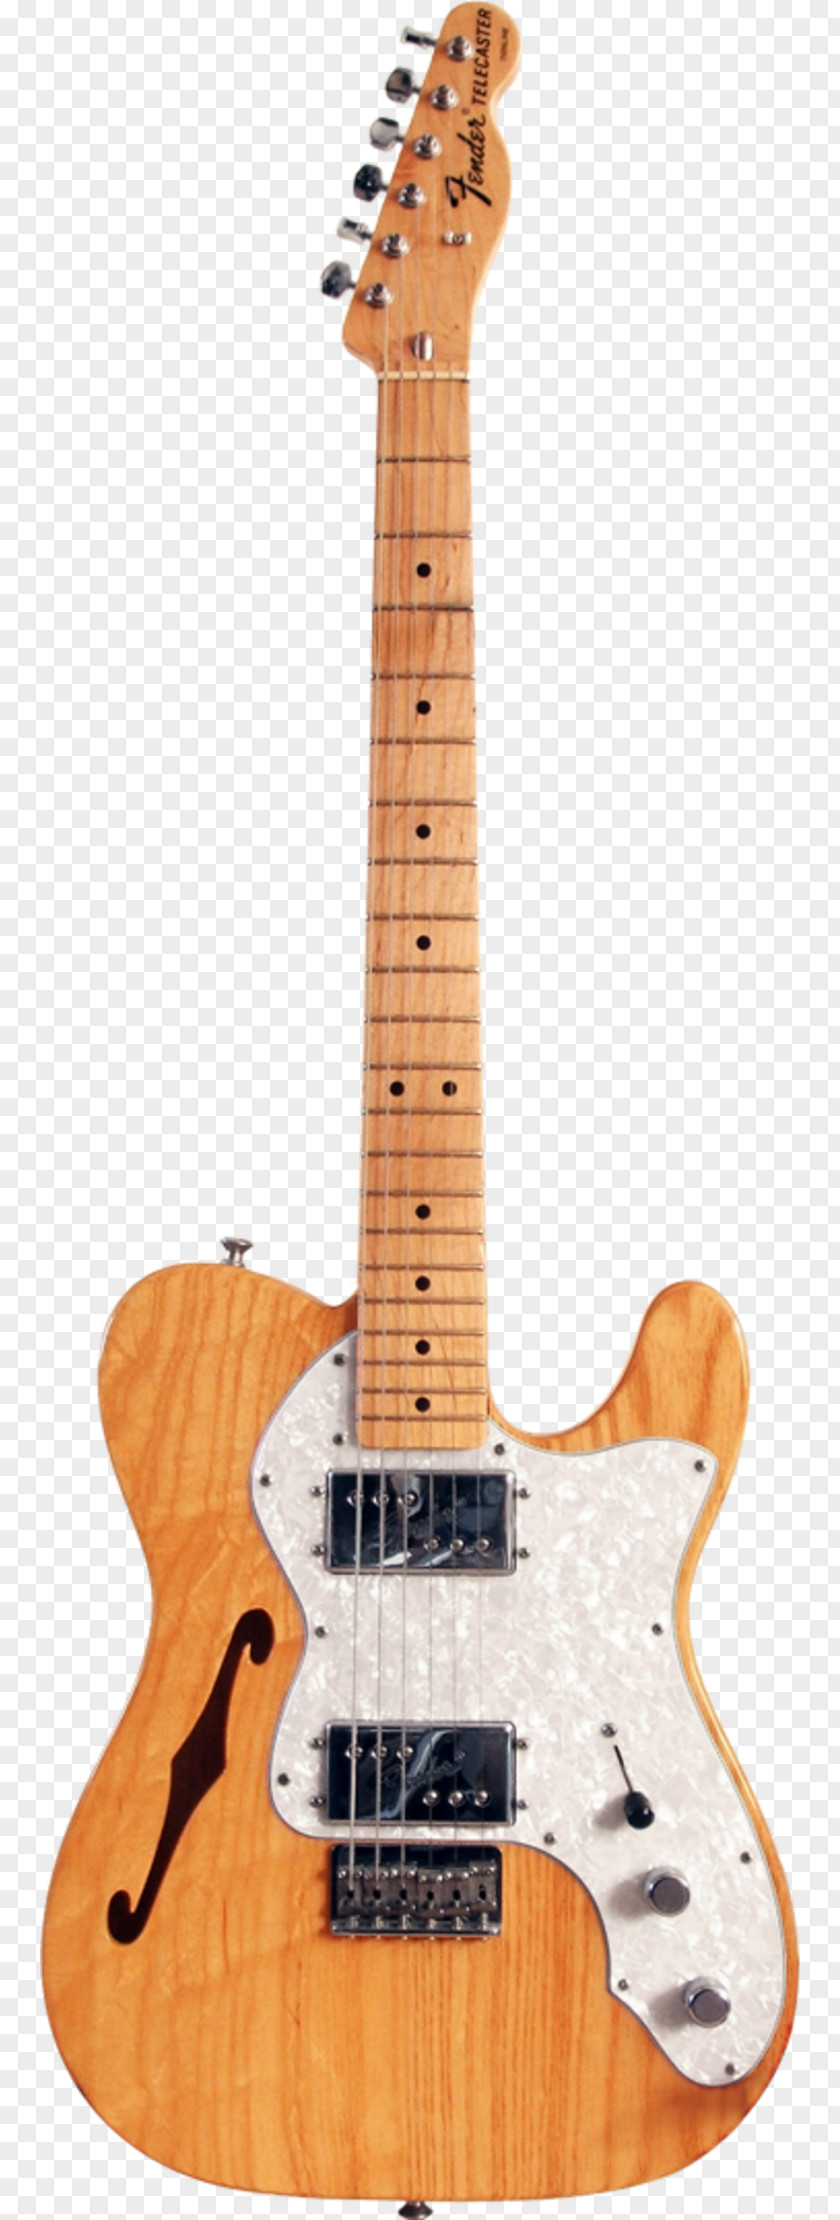 Acoustic Guitar Fender Telecaster Thinline Stratocaster Deluxe Musical Instruments Corporation PNG